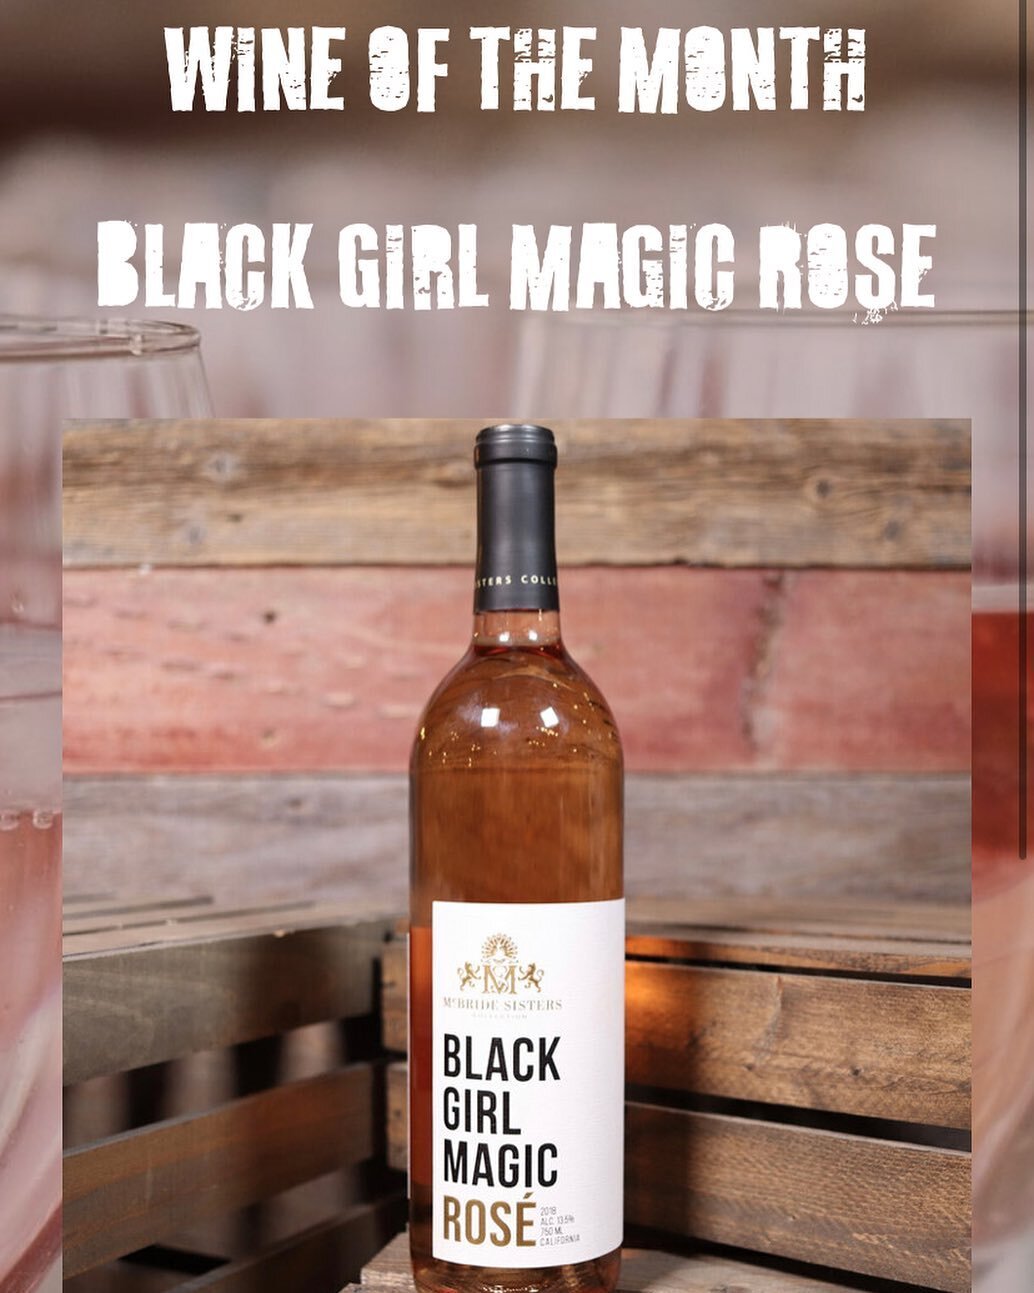 Our wine of the month goes to a female Black owned &quot;Black Girl Magic Rose&quot; by @mcbridesisters 🍷🍷
.
.
Find out more about it on our website. Link in Bio. Until then sip away 😘😉
.
.
.
#rose #wine #mcbridesisterswine #goodfoodgurus #gfg #h